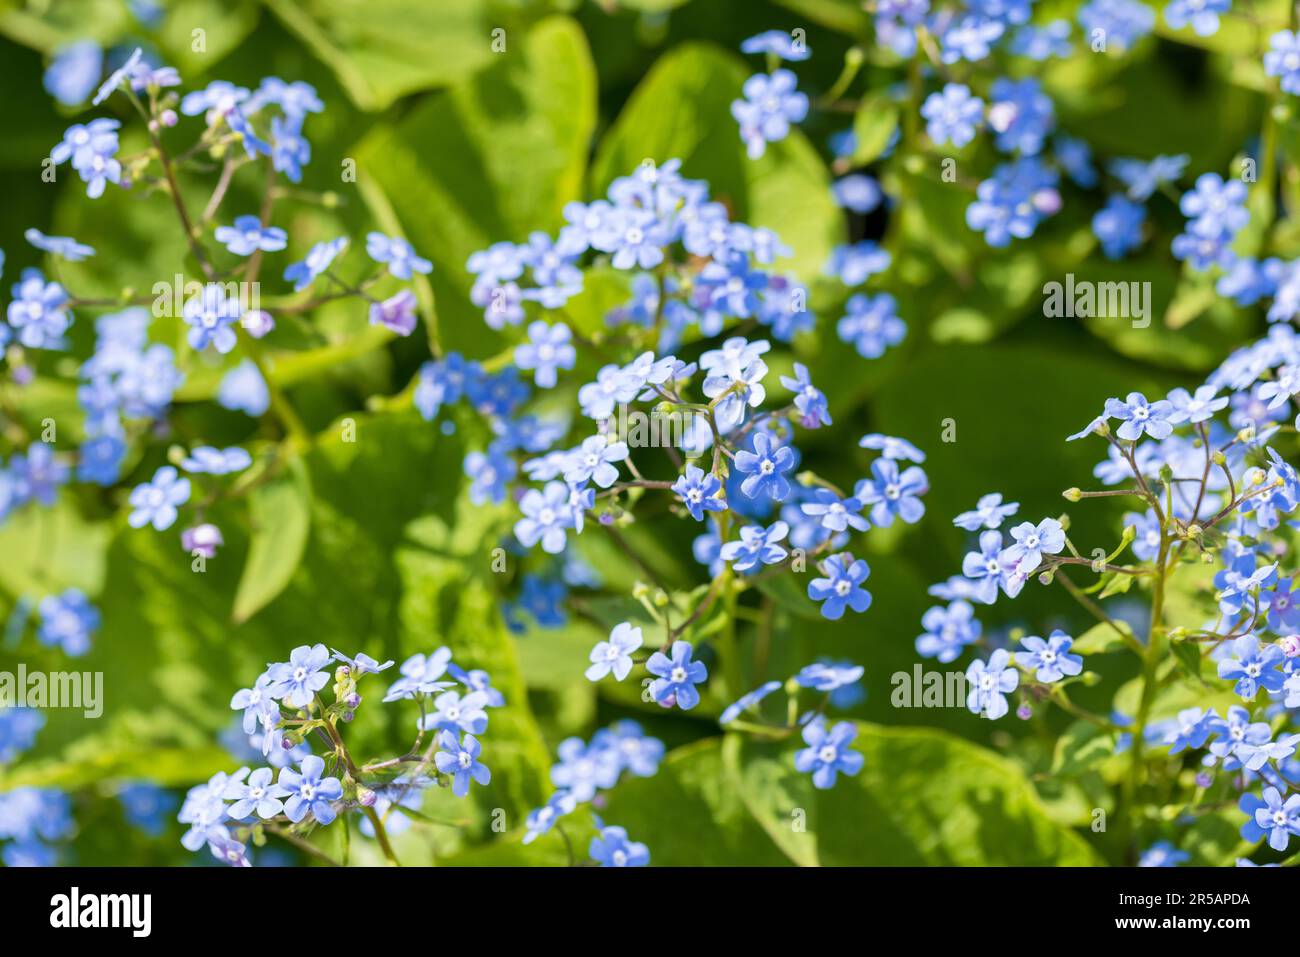 Forget Me Not, blue flowers over blurred natural green background on a sunny summer day. Macro photo with soft selective focus. Myosotis is a genus of Stock Photo